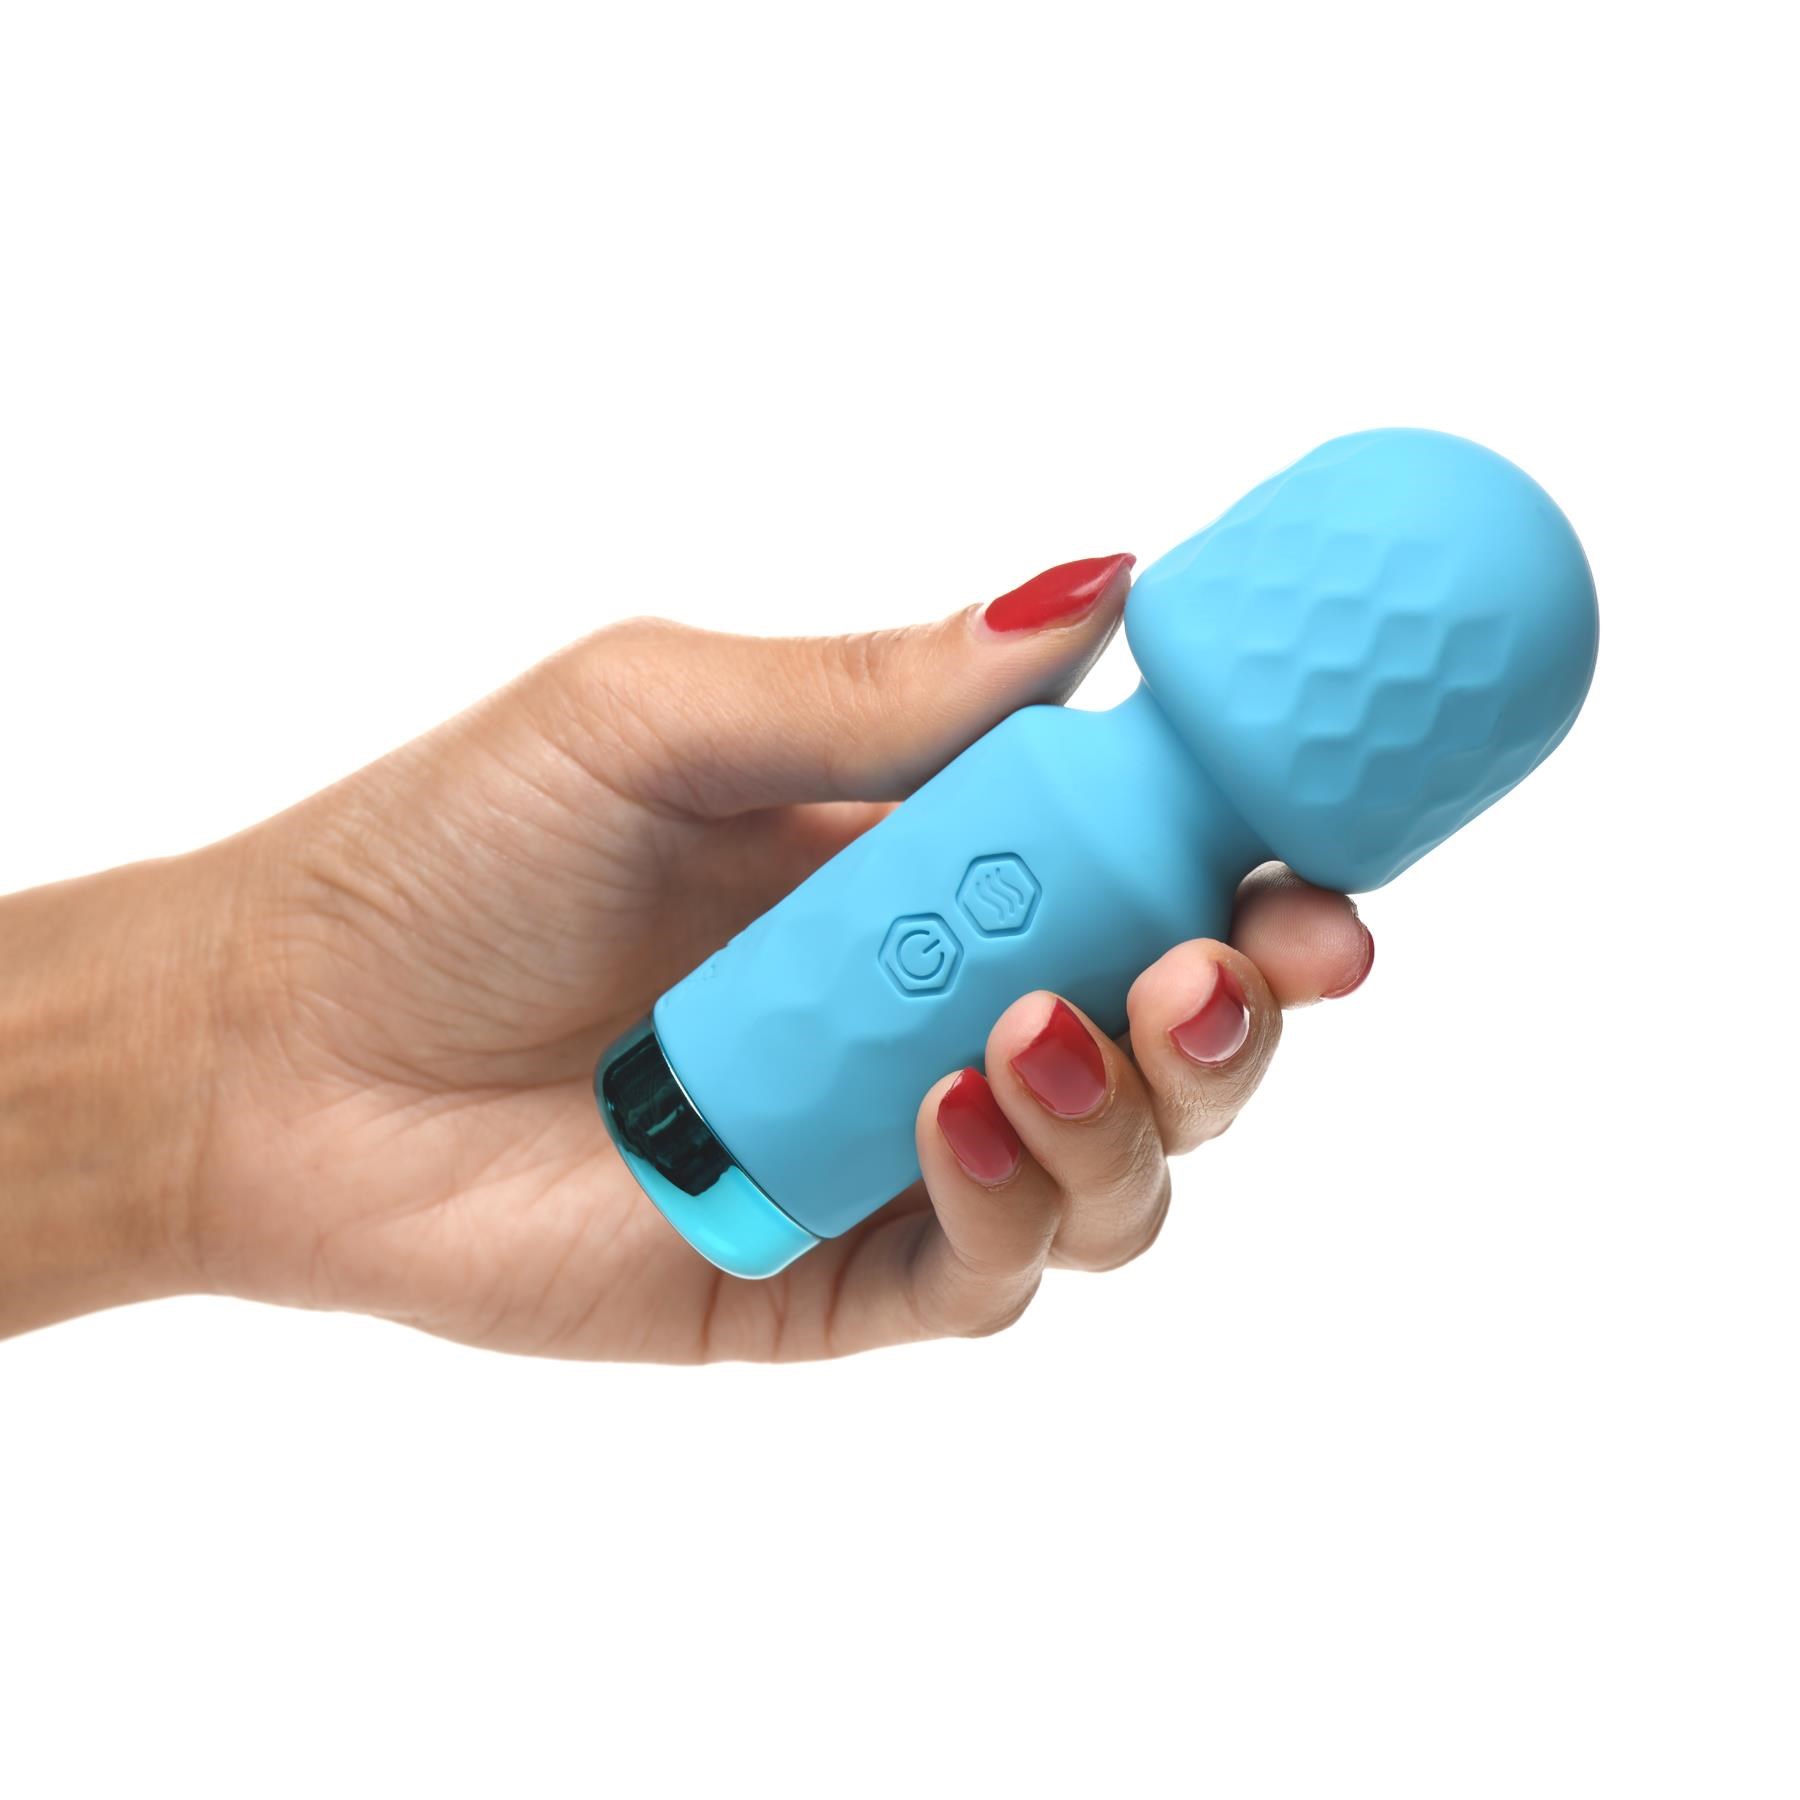 Bang! 10 Function Mini Silicone Wand - Hand Shot to Show Size